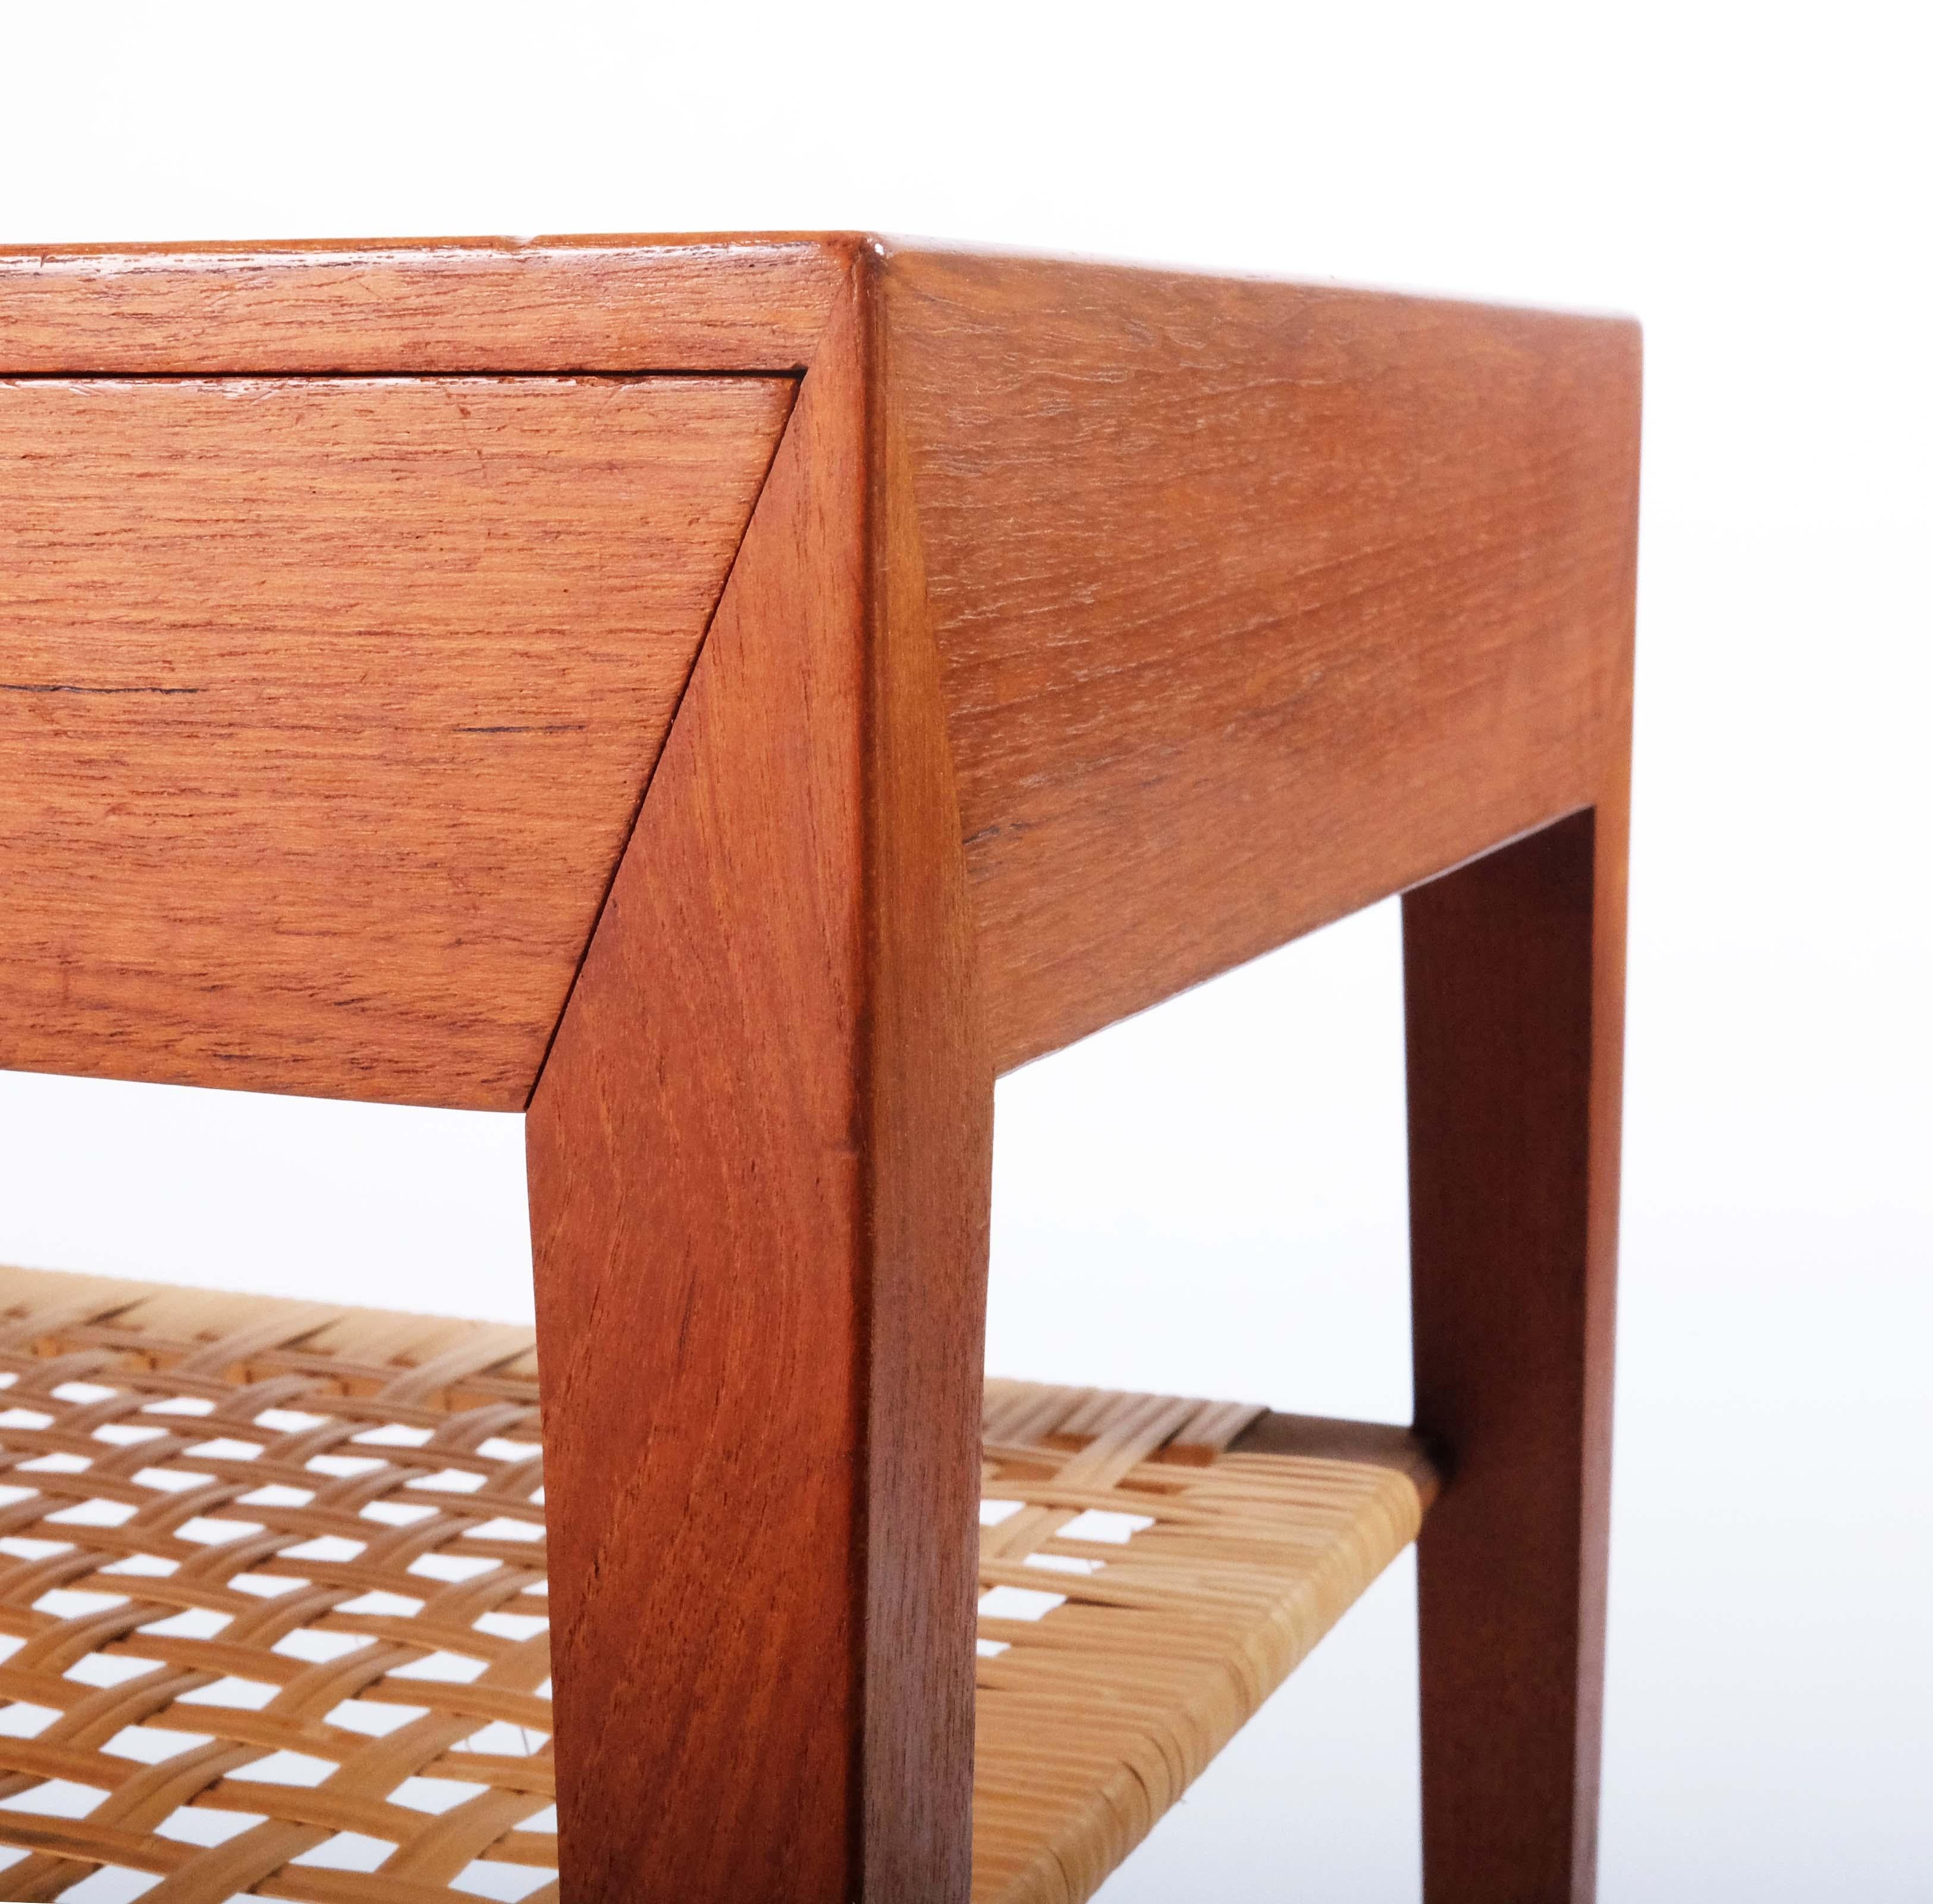 The furniture factory Haslev Møbelsnedkeri had it's own very distinct style developed by their chief designer Severin Hansen. This small side table in teak and cane is a very good example of that style.